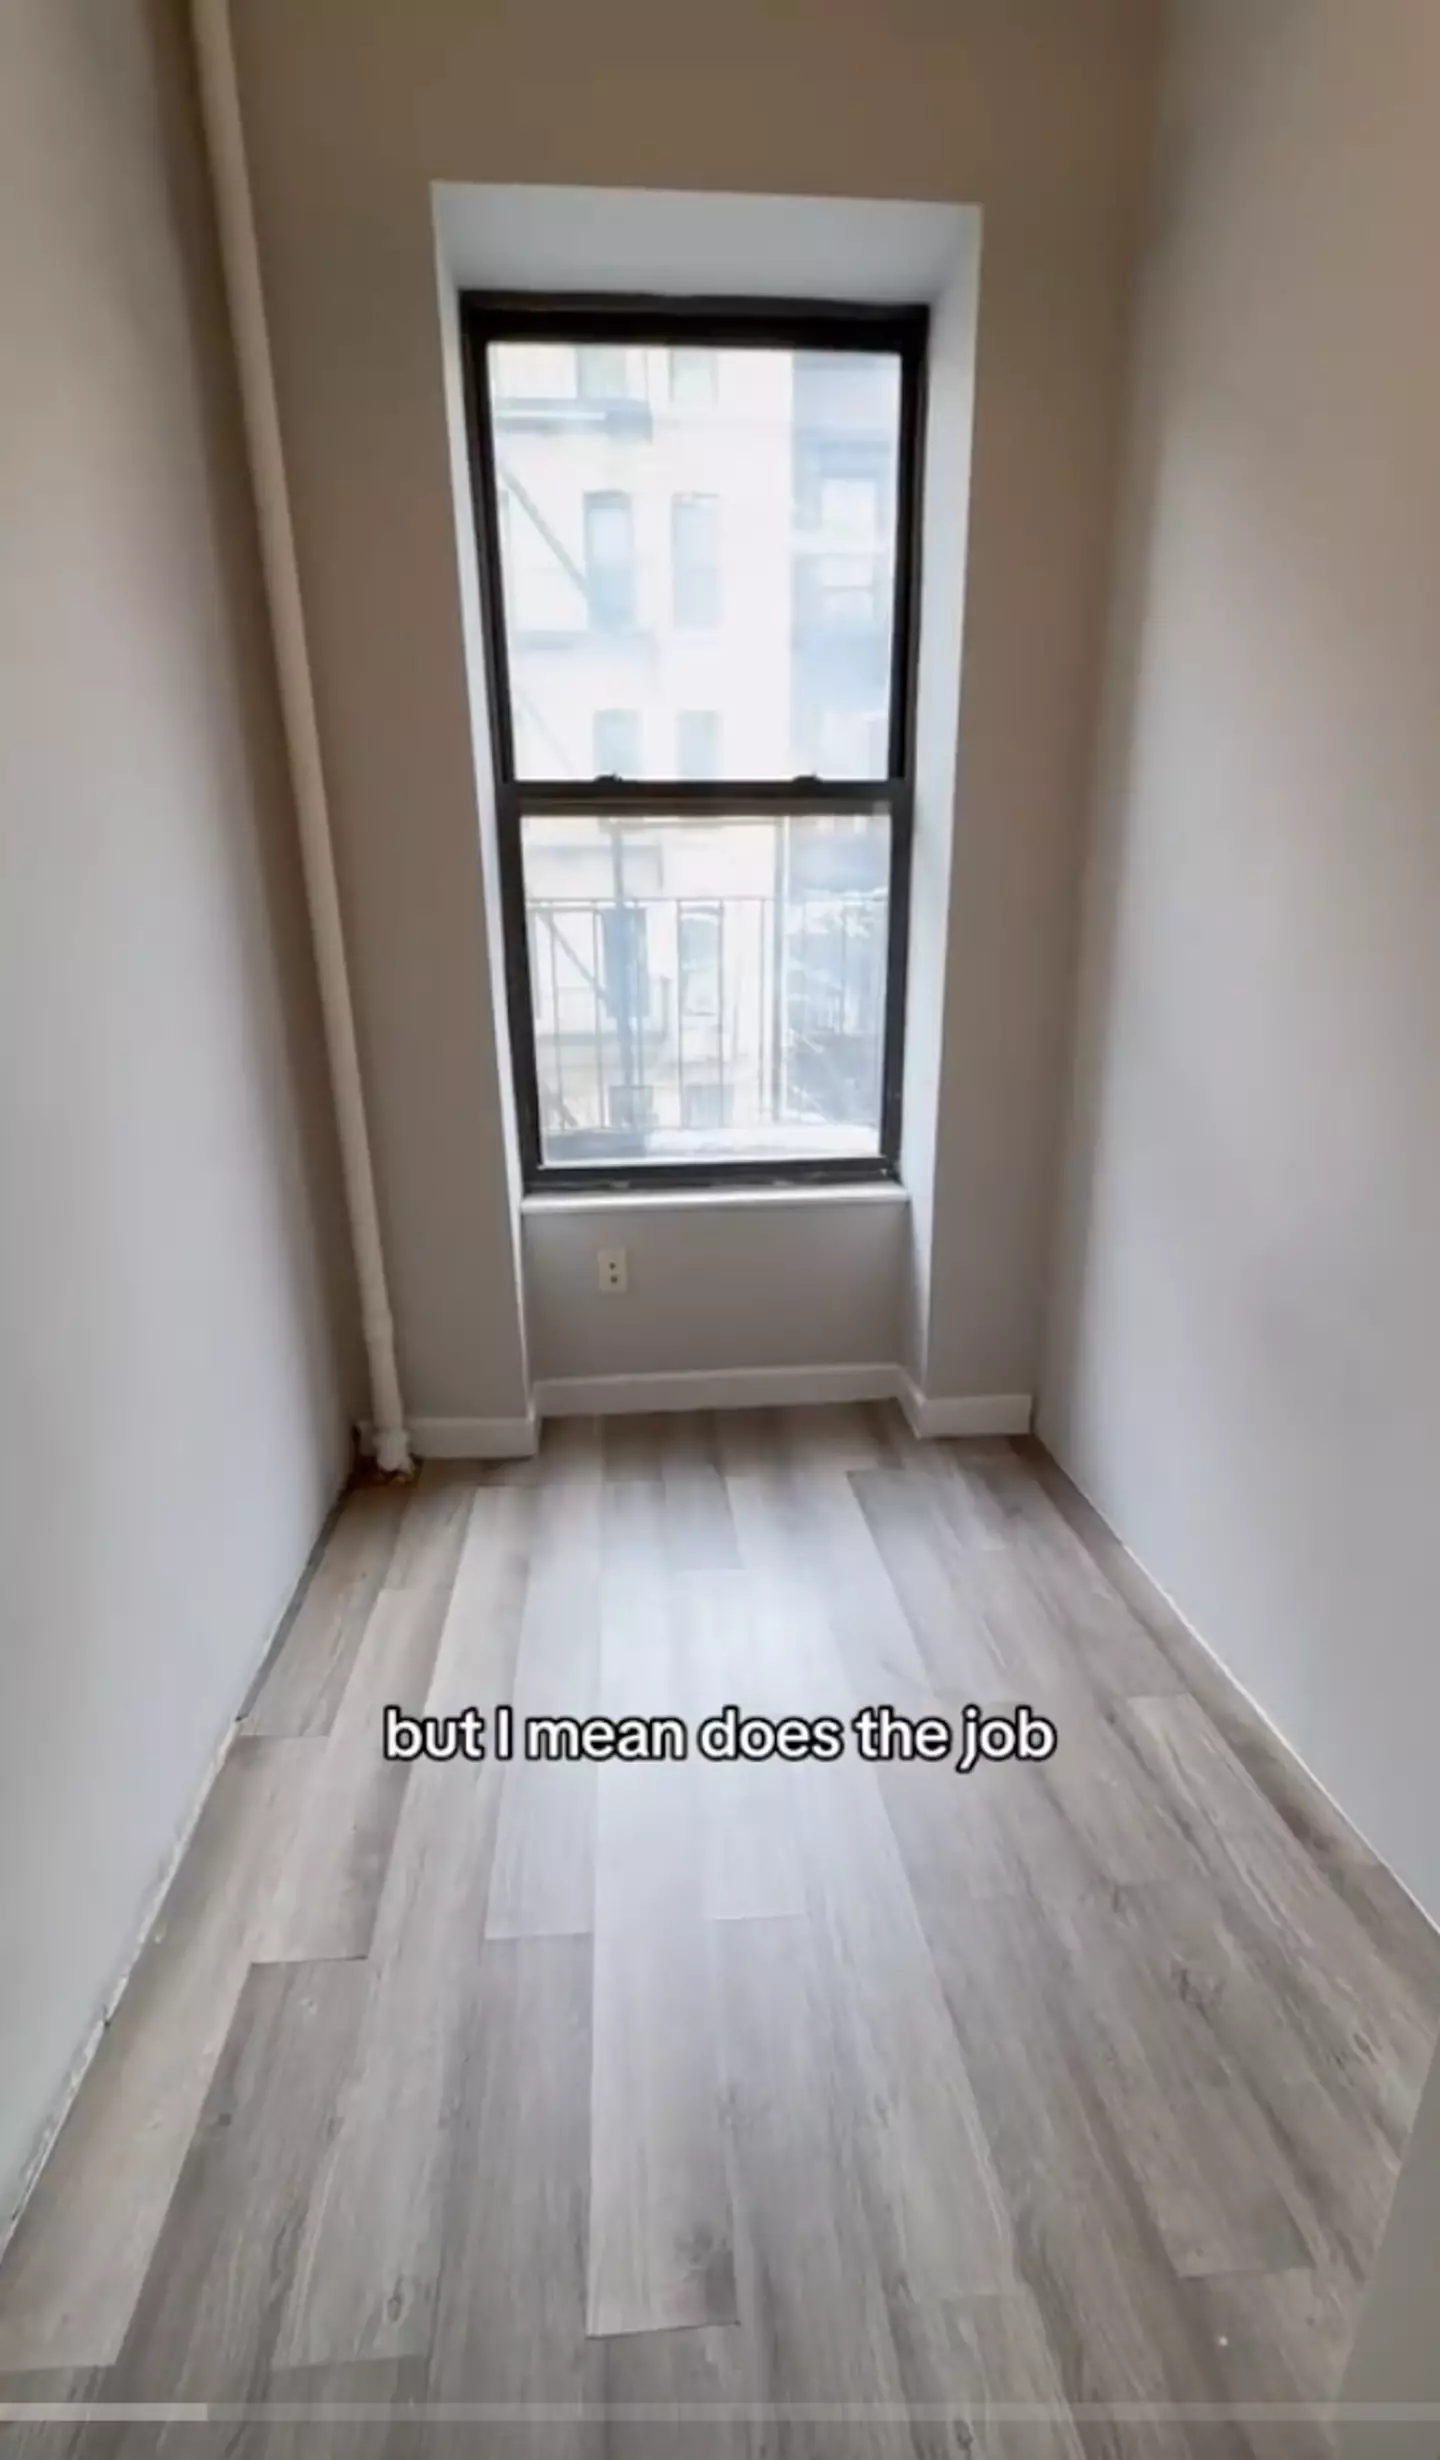 The entire ‘apartment’ is this one room.